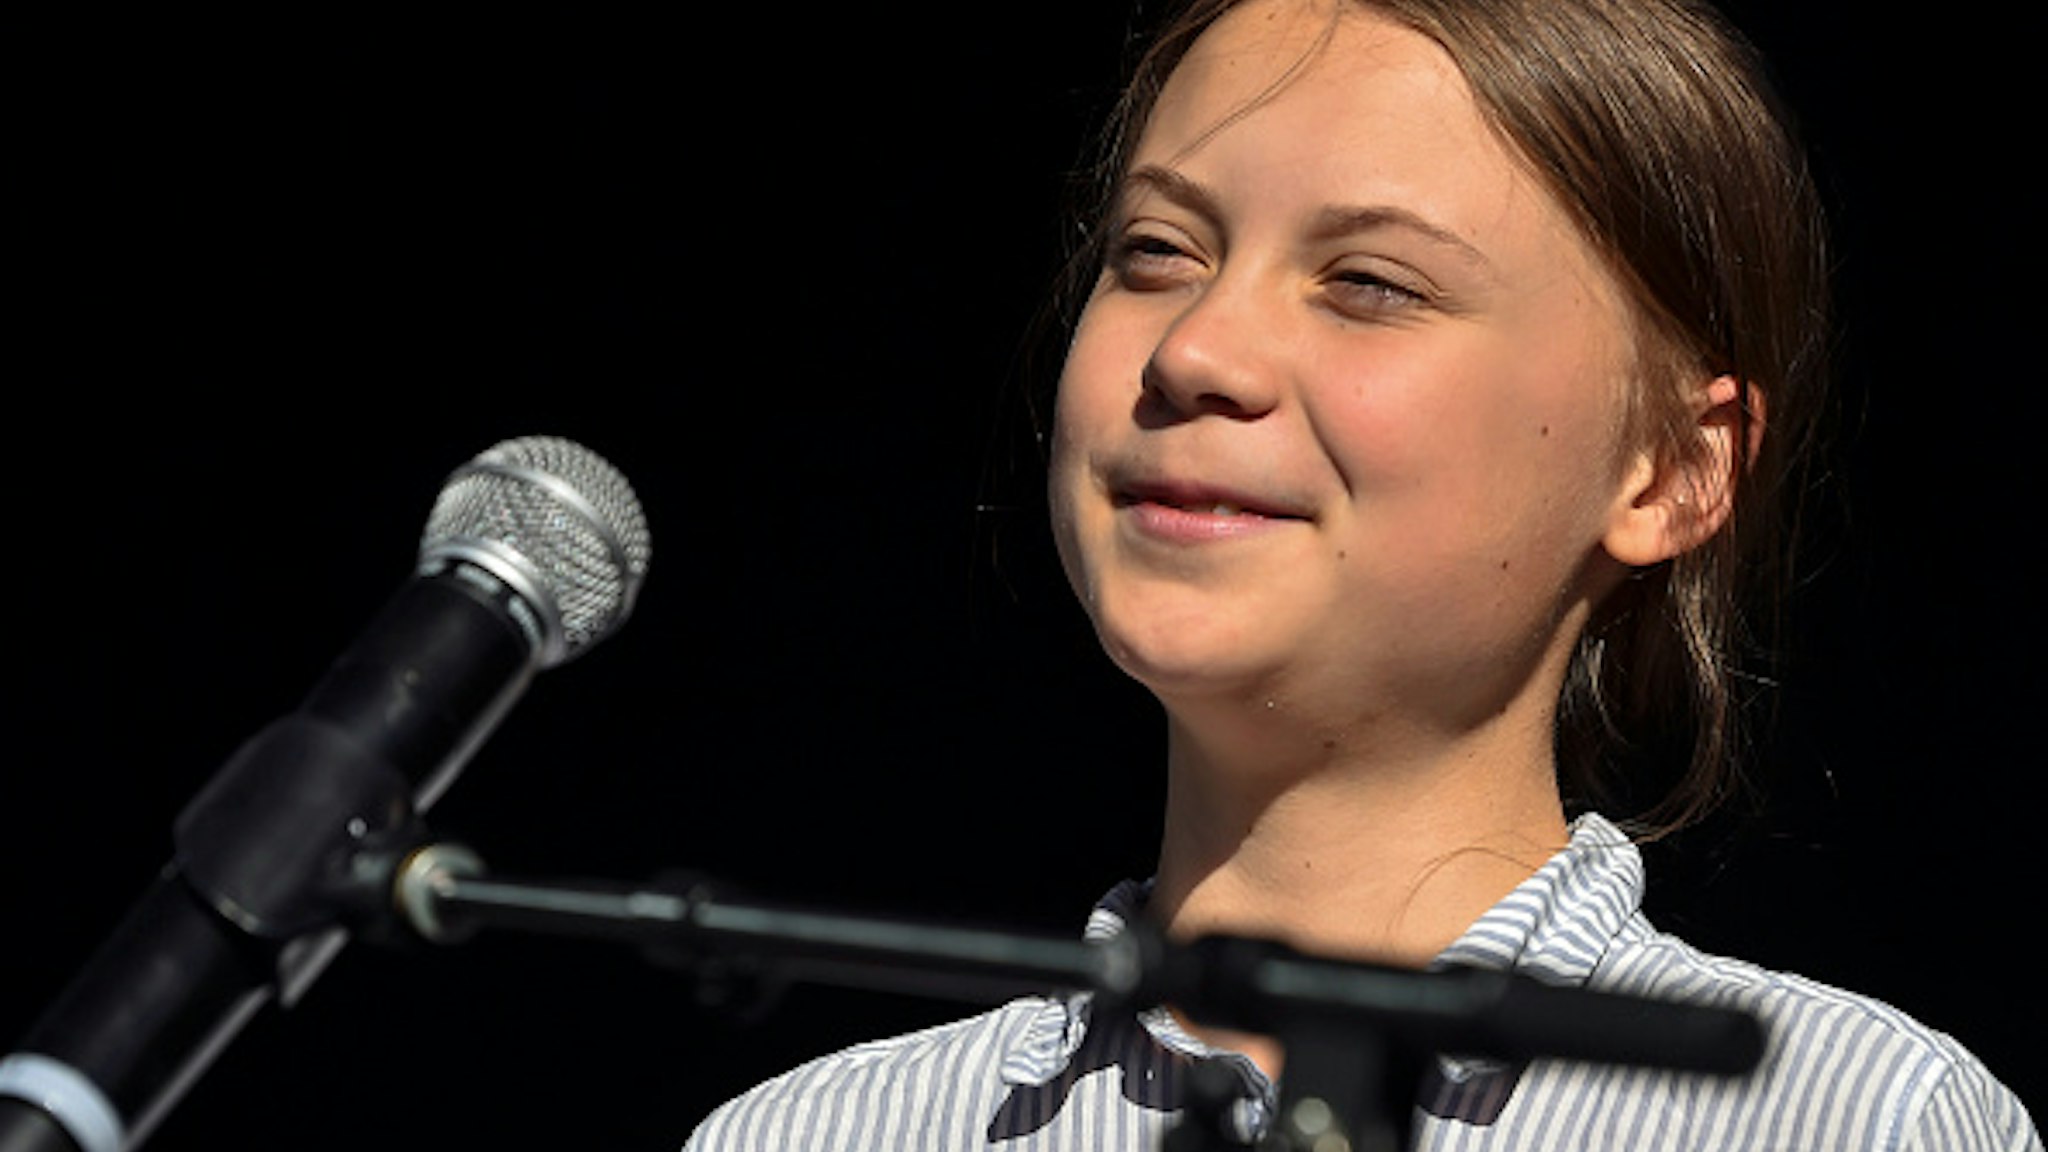 MONTREAL, QC - SEPTEMBER 27: Swedish climate activist Greta Thunberg takes to the podium to address young activists and their supporters during the rally for action on climate change on September 27, 2019 in Montreal, Canada. Hundreds of thousands of people are expected to take part in what could be the city's largest climate march.